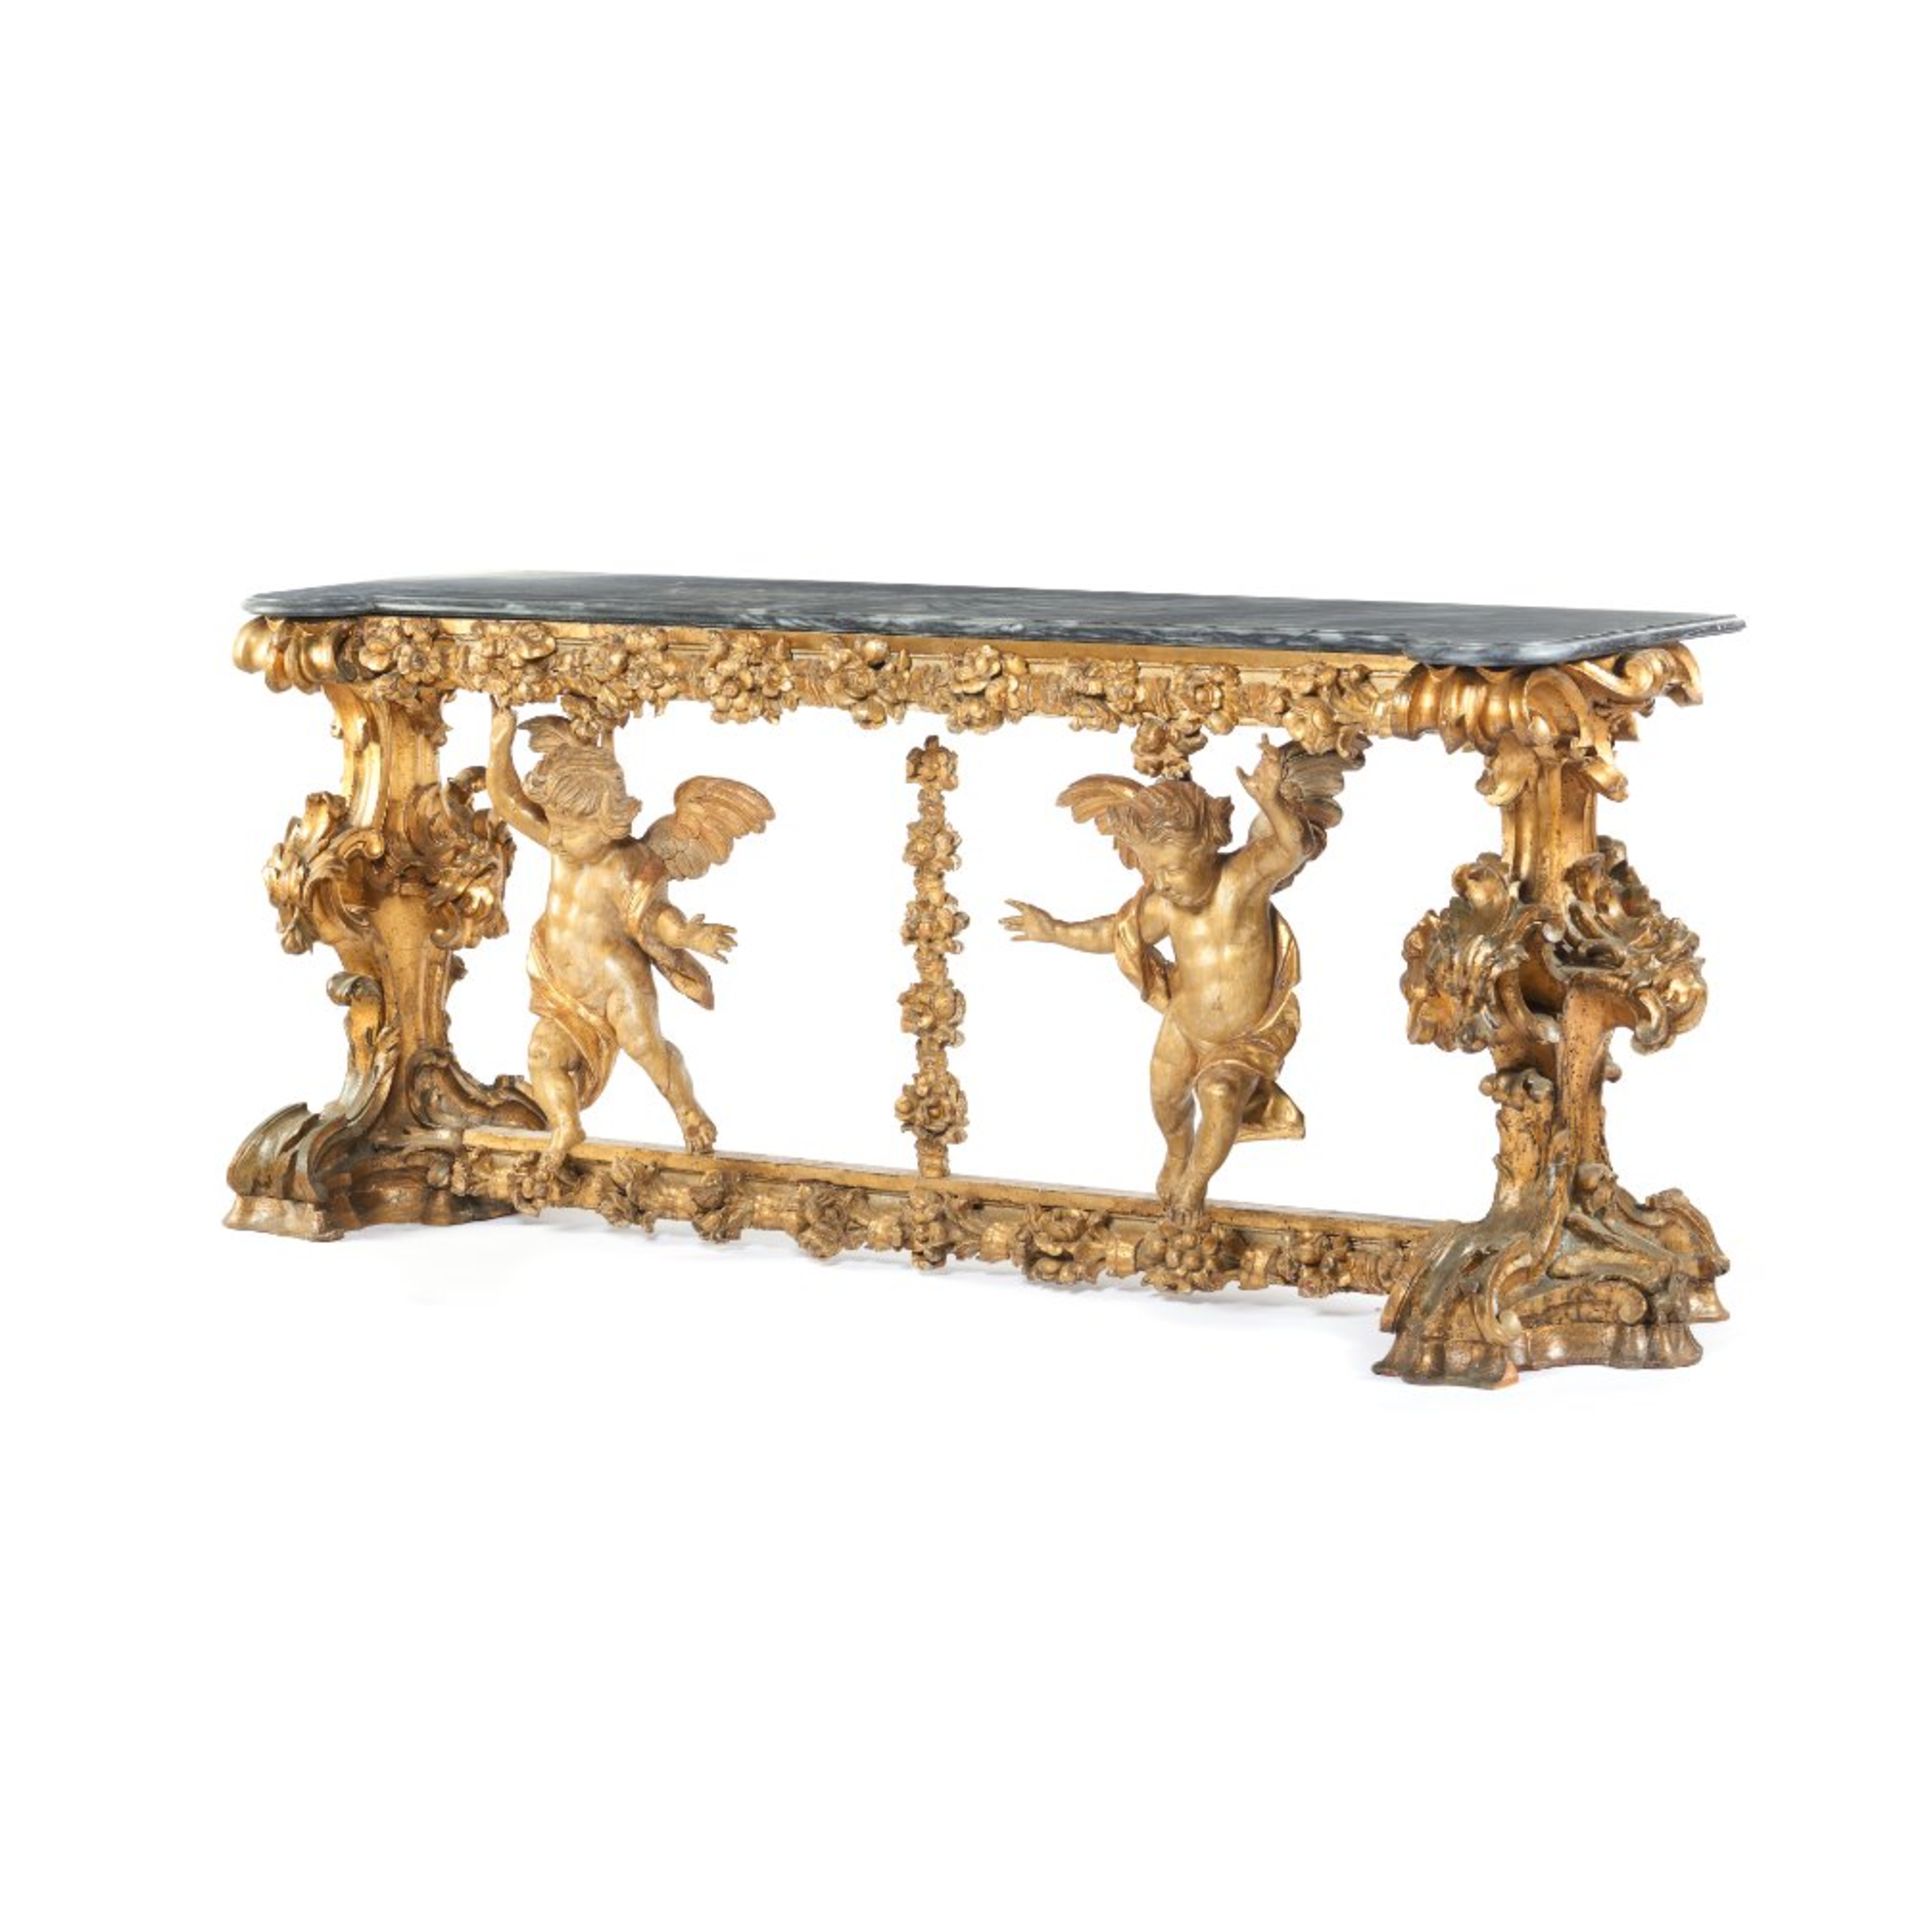 A large baroque console table